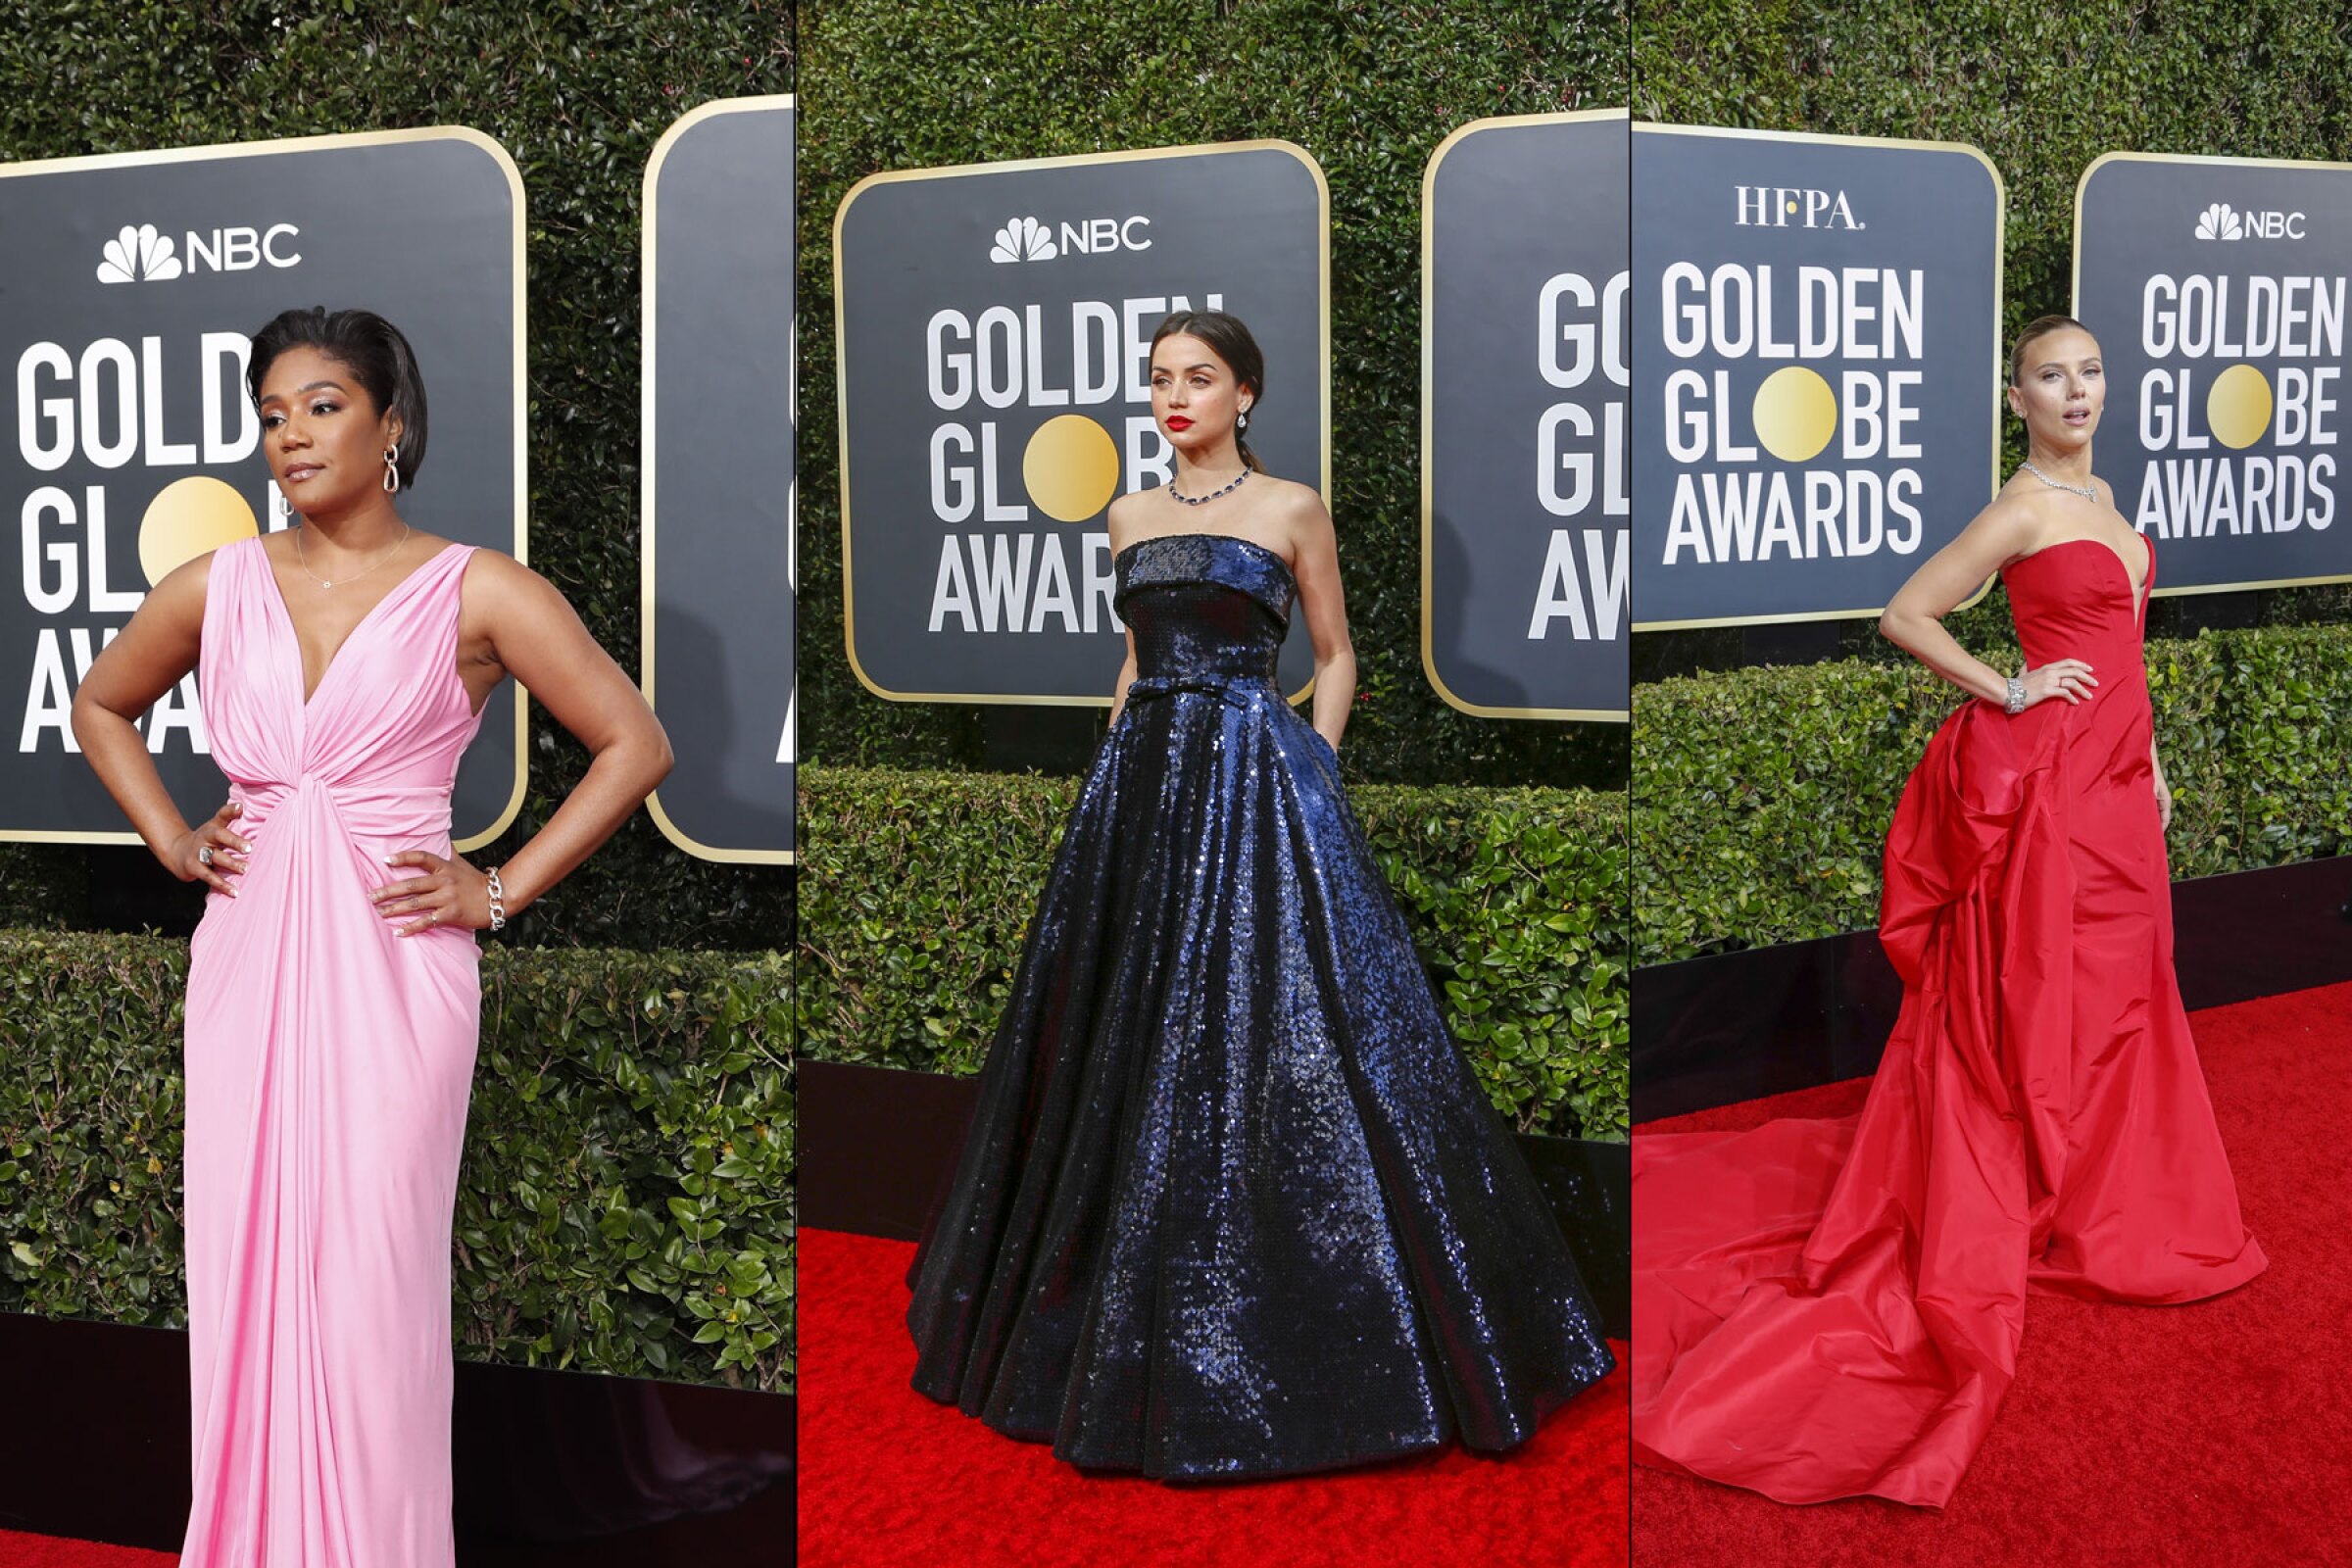 Golden Globes 2020 fashion hits and misses